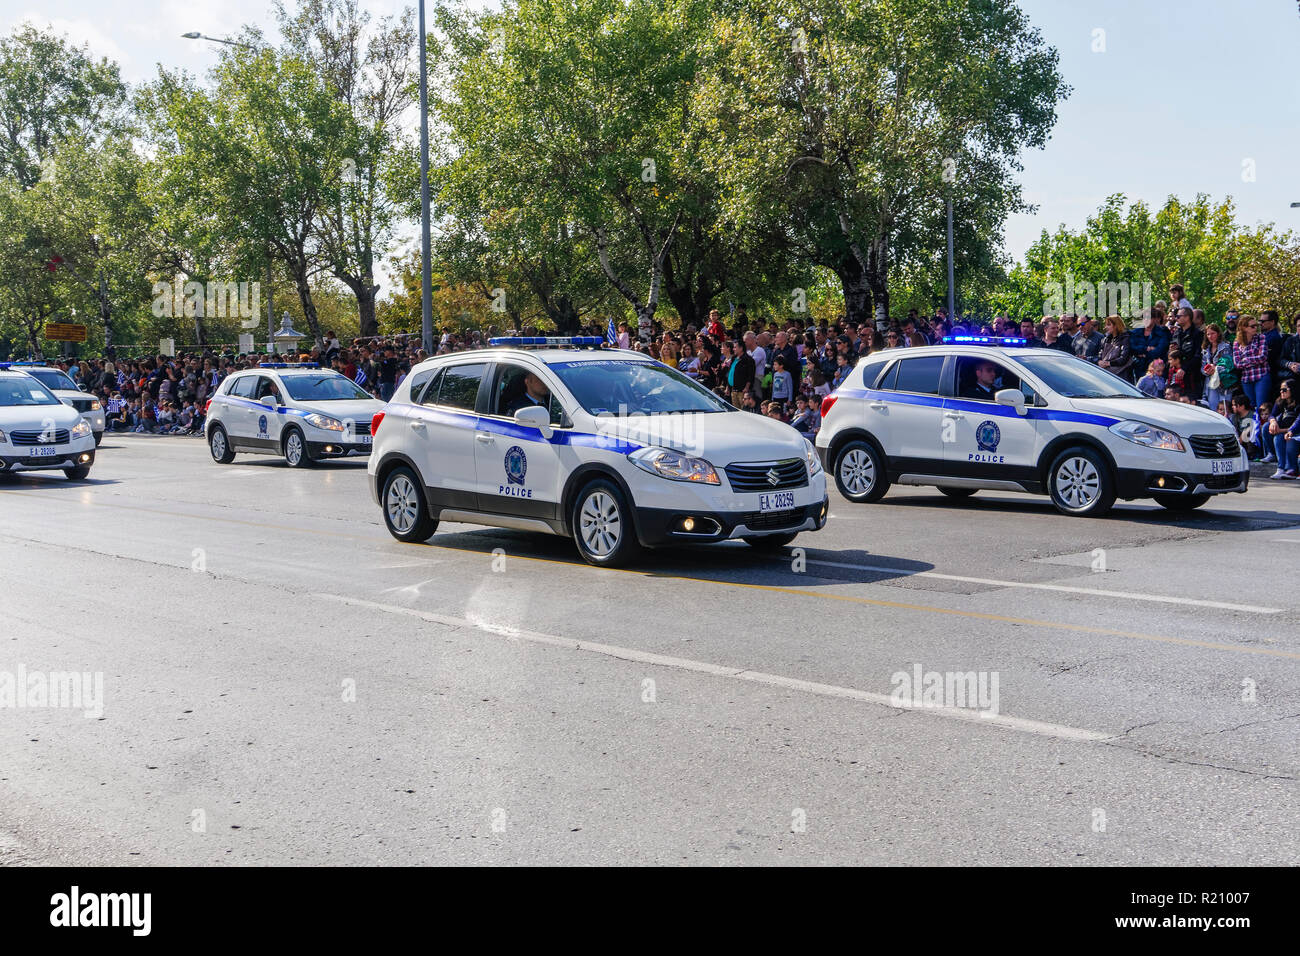 Hellenic Police cars during Oxi Day parade in Thessaloniki, Greece. Greek police - Ellinikii Astynomia Security forces vehicles with personnel. Stock Photo